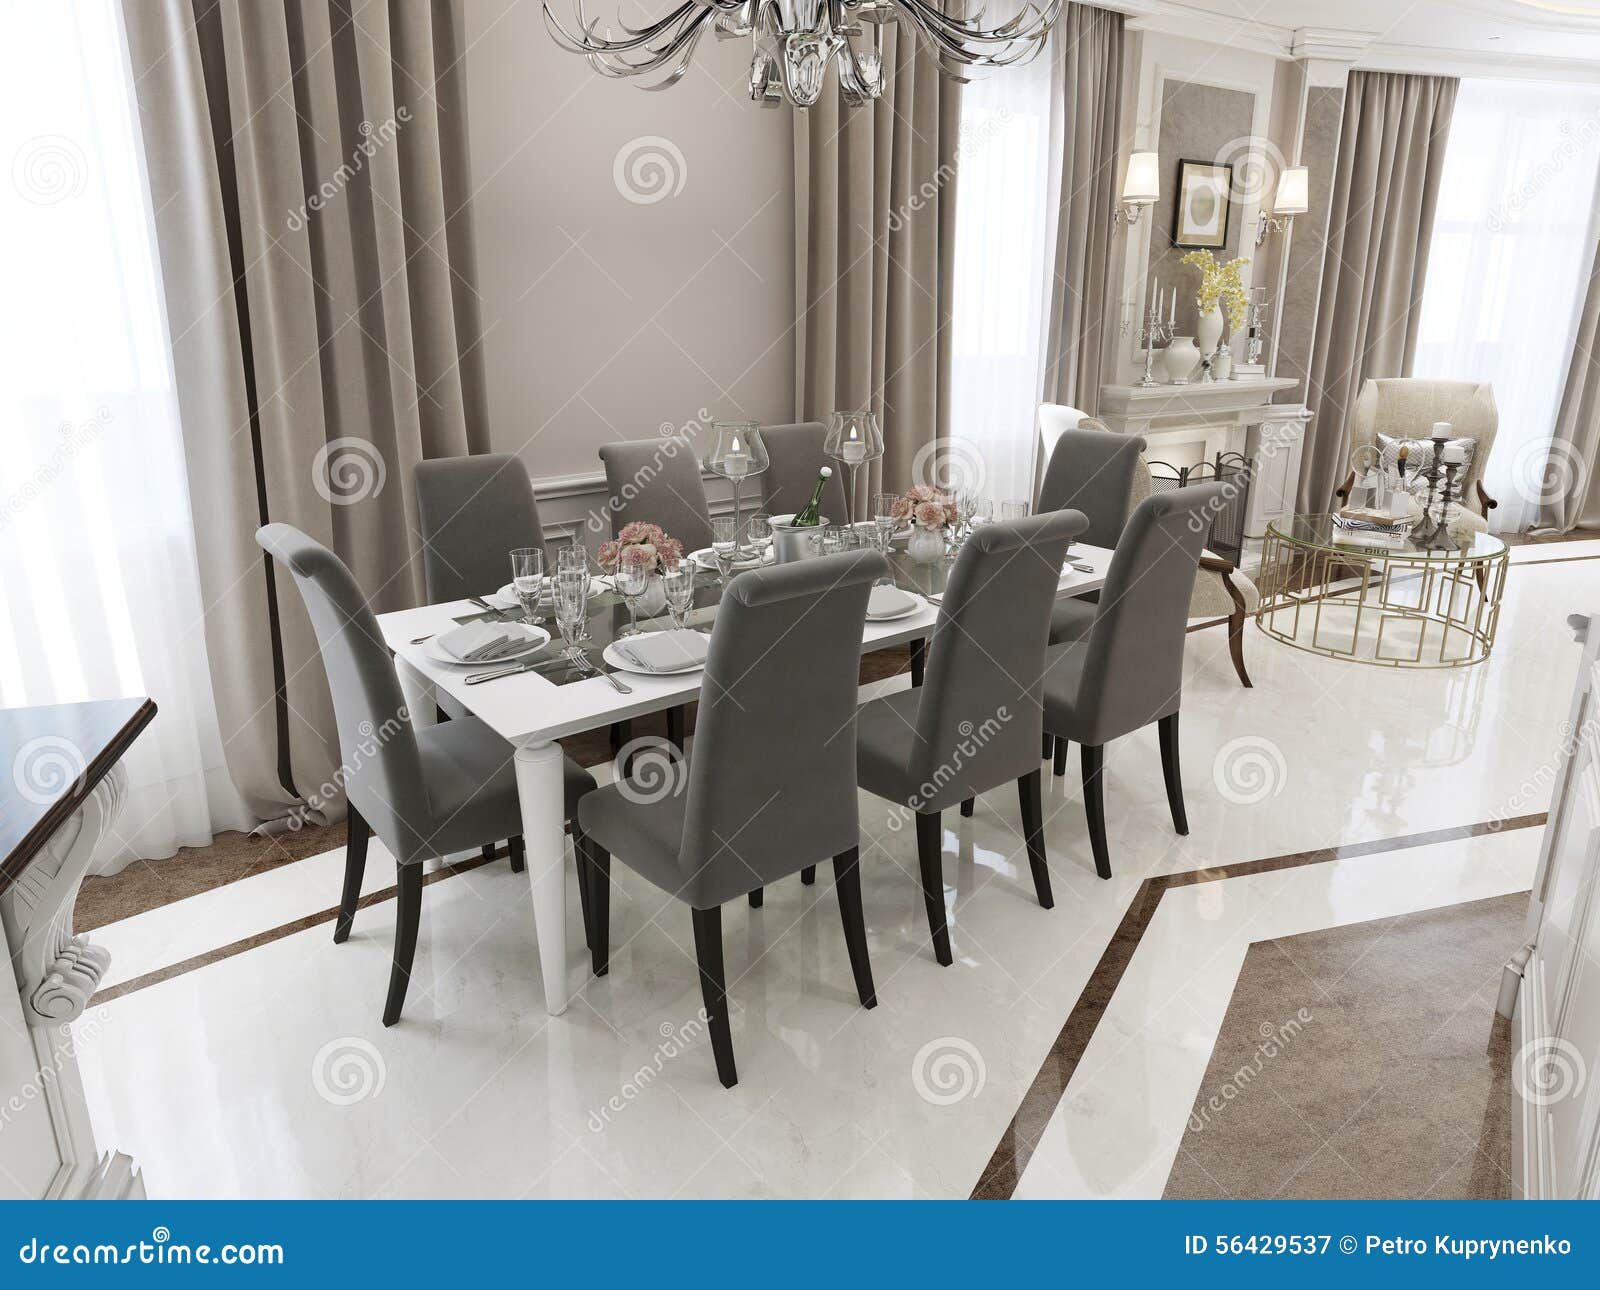 Luxury Dining Room Design Merging Style And Comfort For Memorable ...